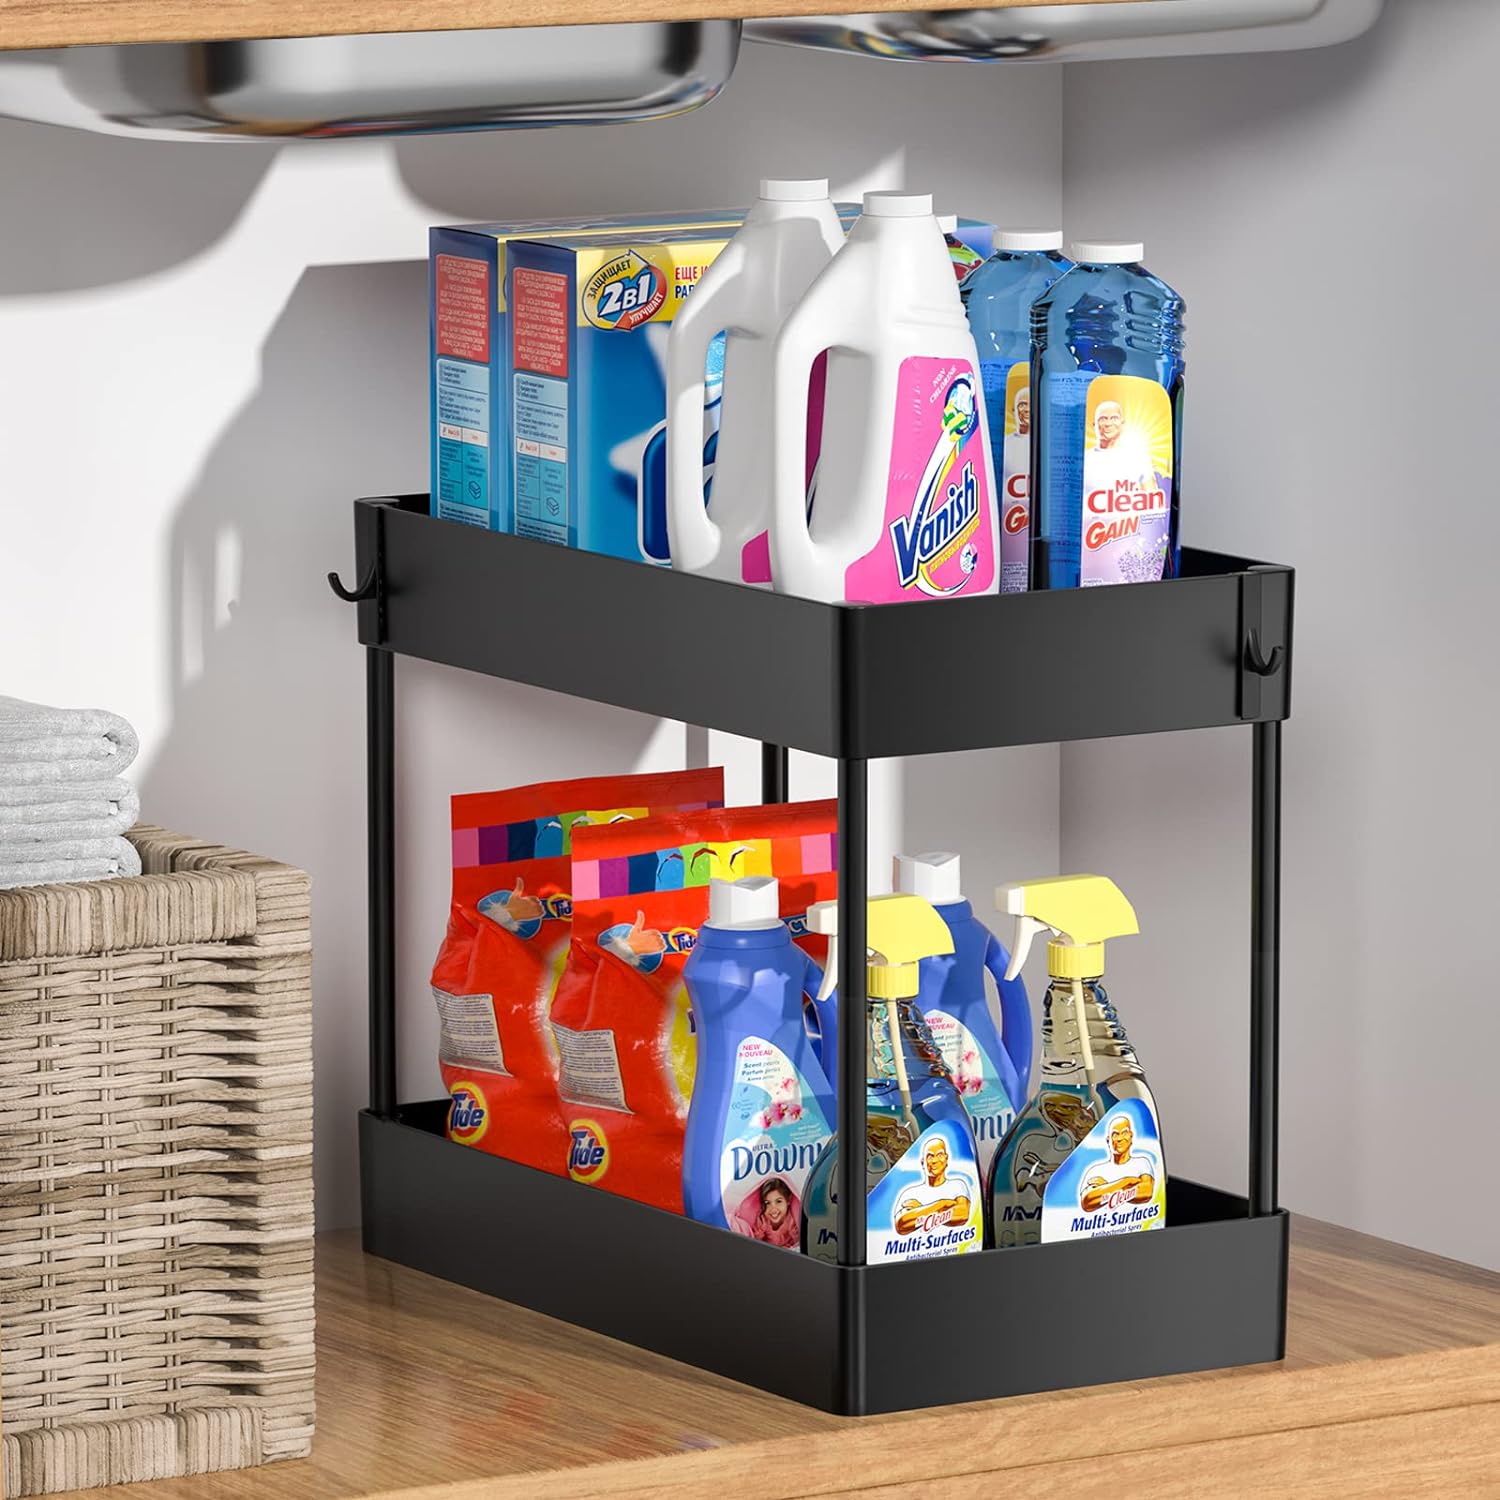 4 Tier Under Sink Organizer Under Sink Storage Shelves Black Plastic Bath Collection Baskets with Stainless Steel Support Tubes and 4 Pieces Hooks for Bathroom Kitchen Office Supplies